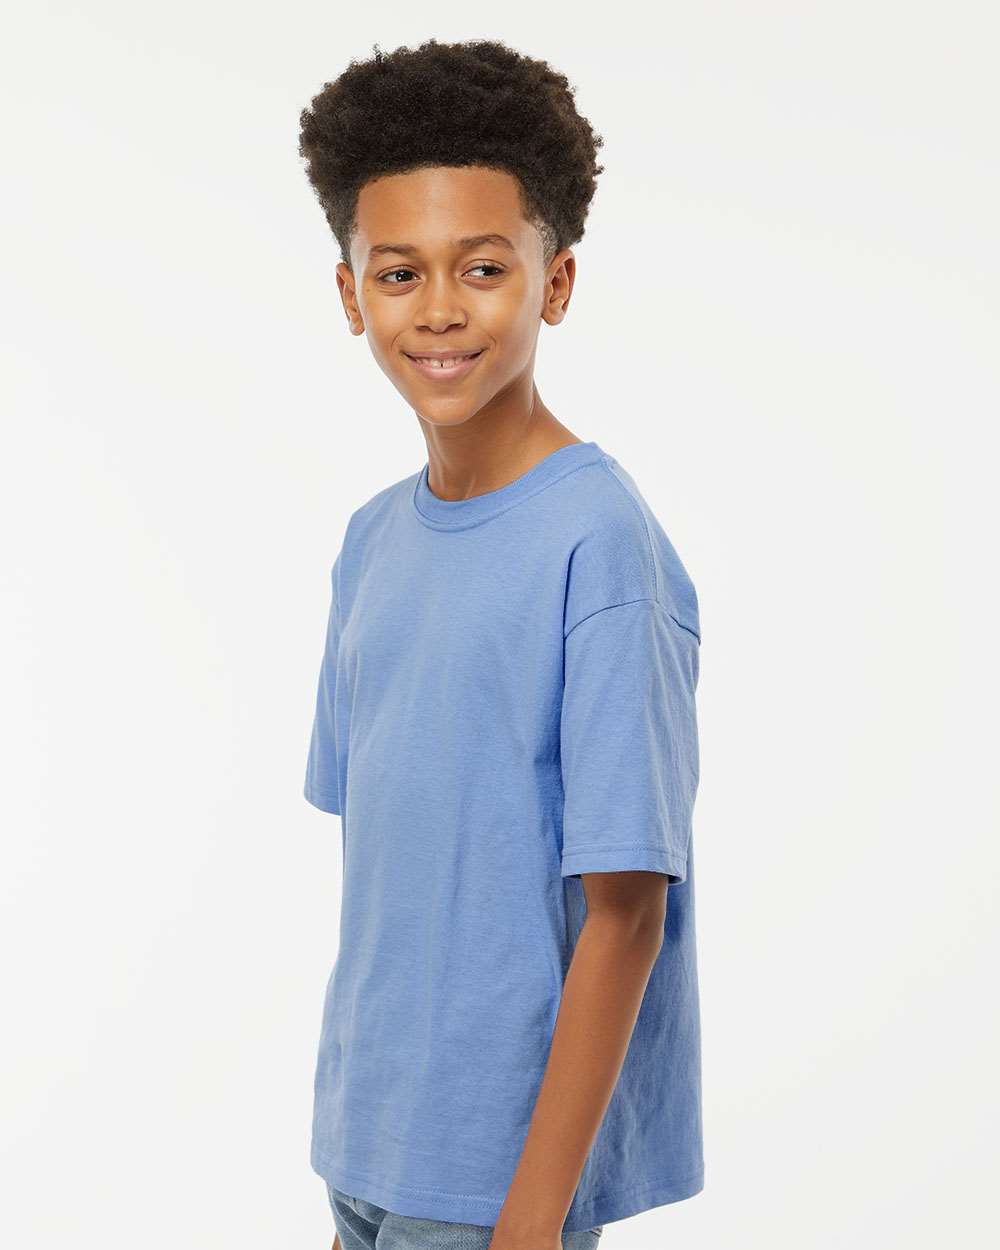 M&O Youth Deluxe Blend T-Shirt 3544 #colormdl_Heather Blue